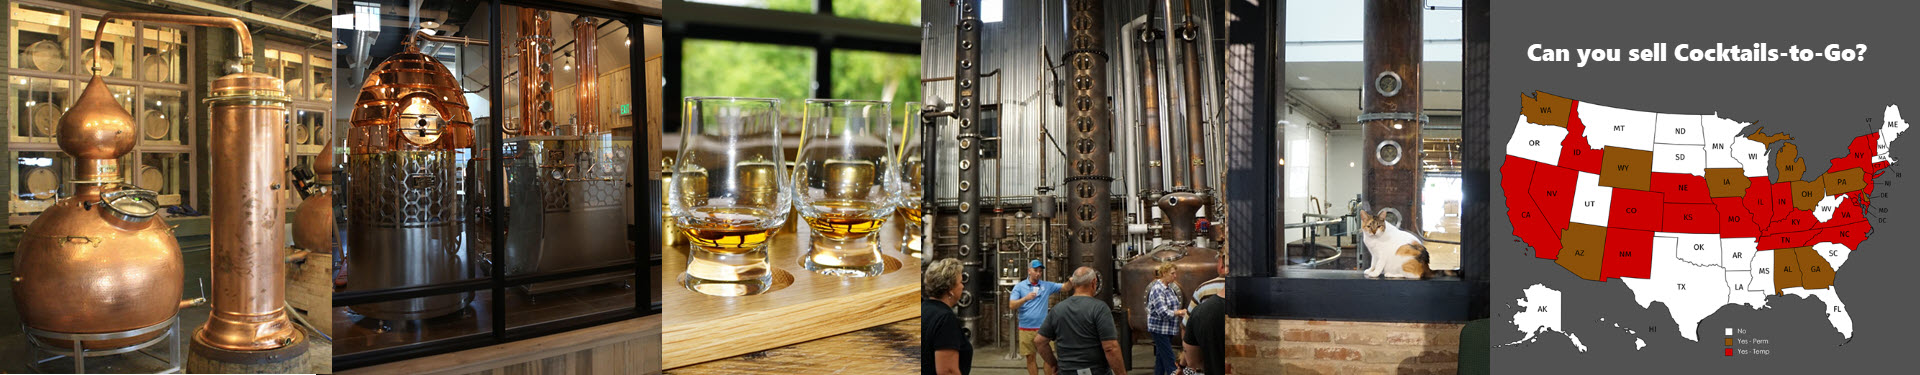 DistilleryTrail - The United States of Distilleries, Bottles Sales, Cocktails to Go, DTC Shipping Survey 2021